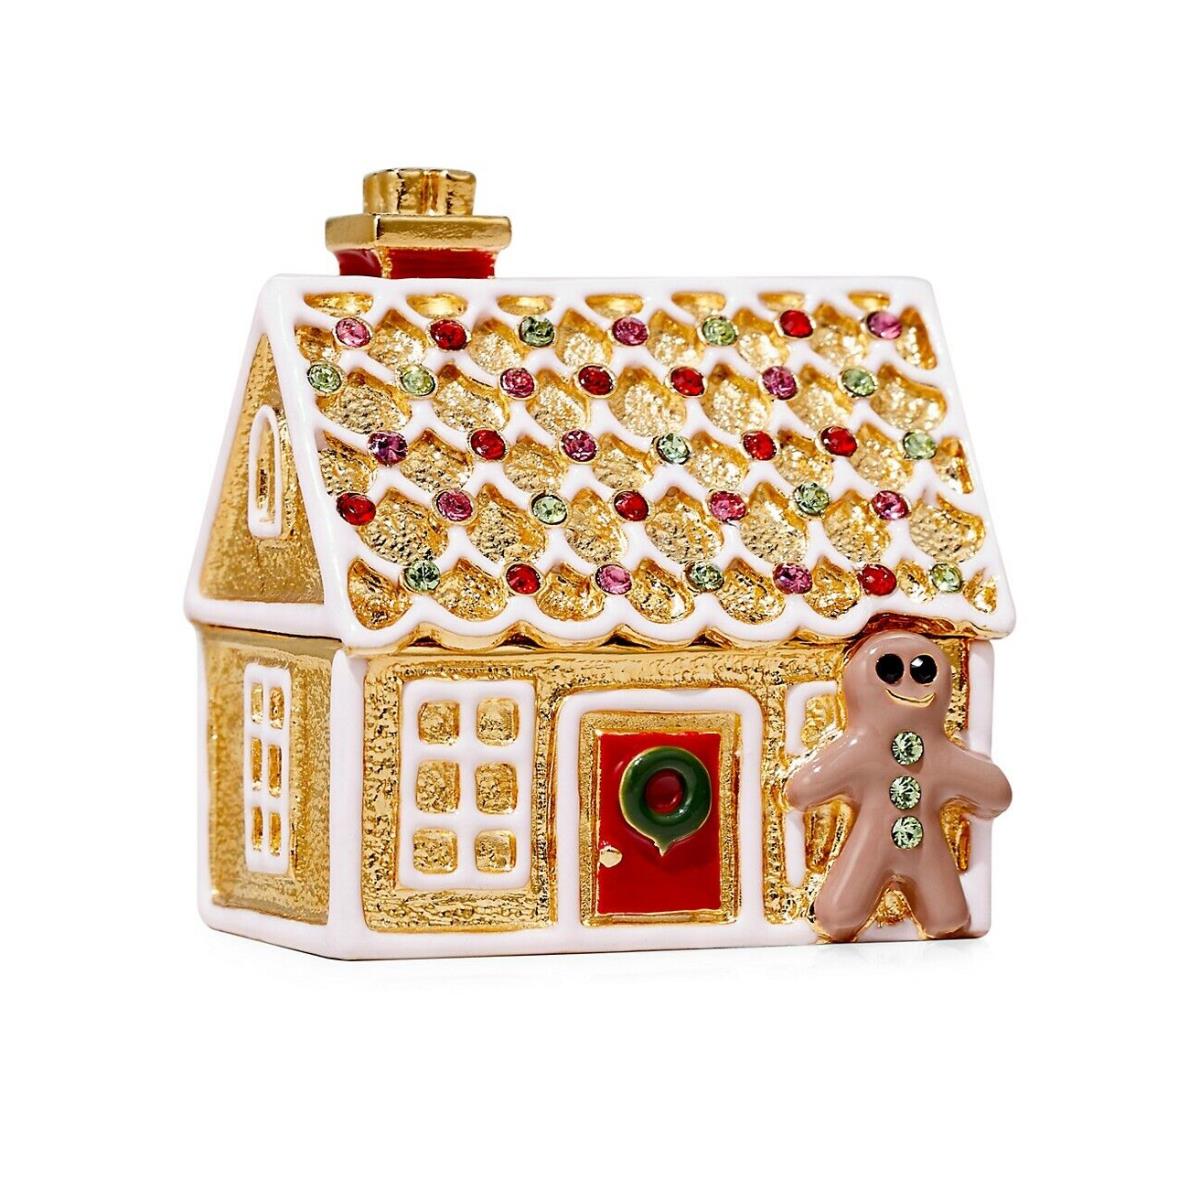 Estee Lauder Gingerbread House Compact Solid Perfume Beautiful 2021